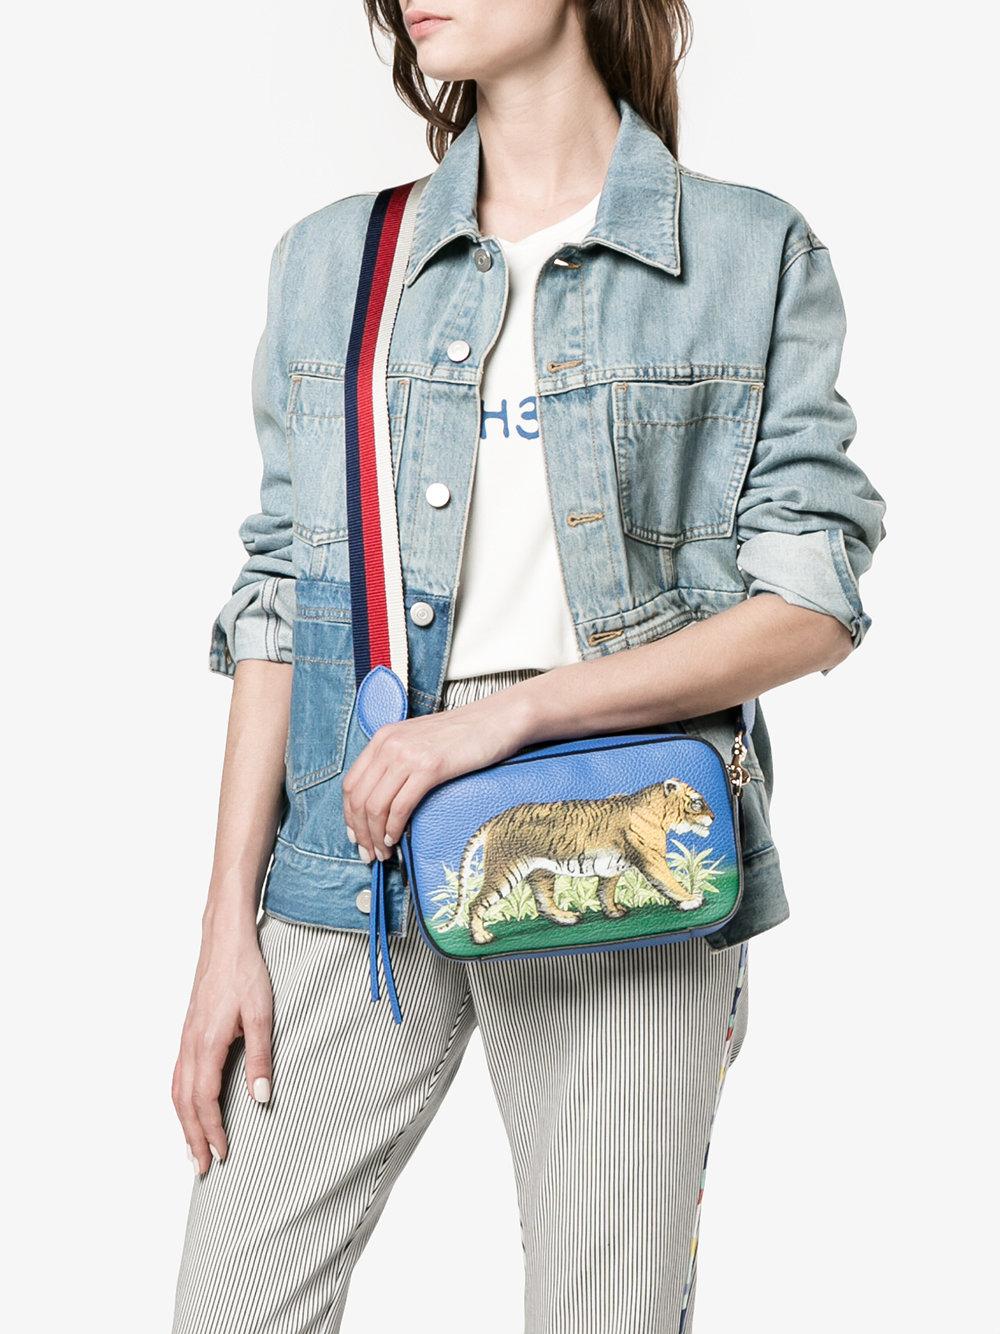 Gucci Leather Bengal Tiger Print Cross-body Bag in Blue - Lyst